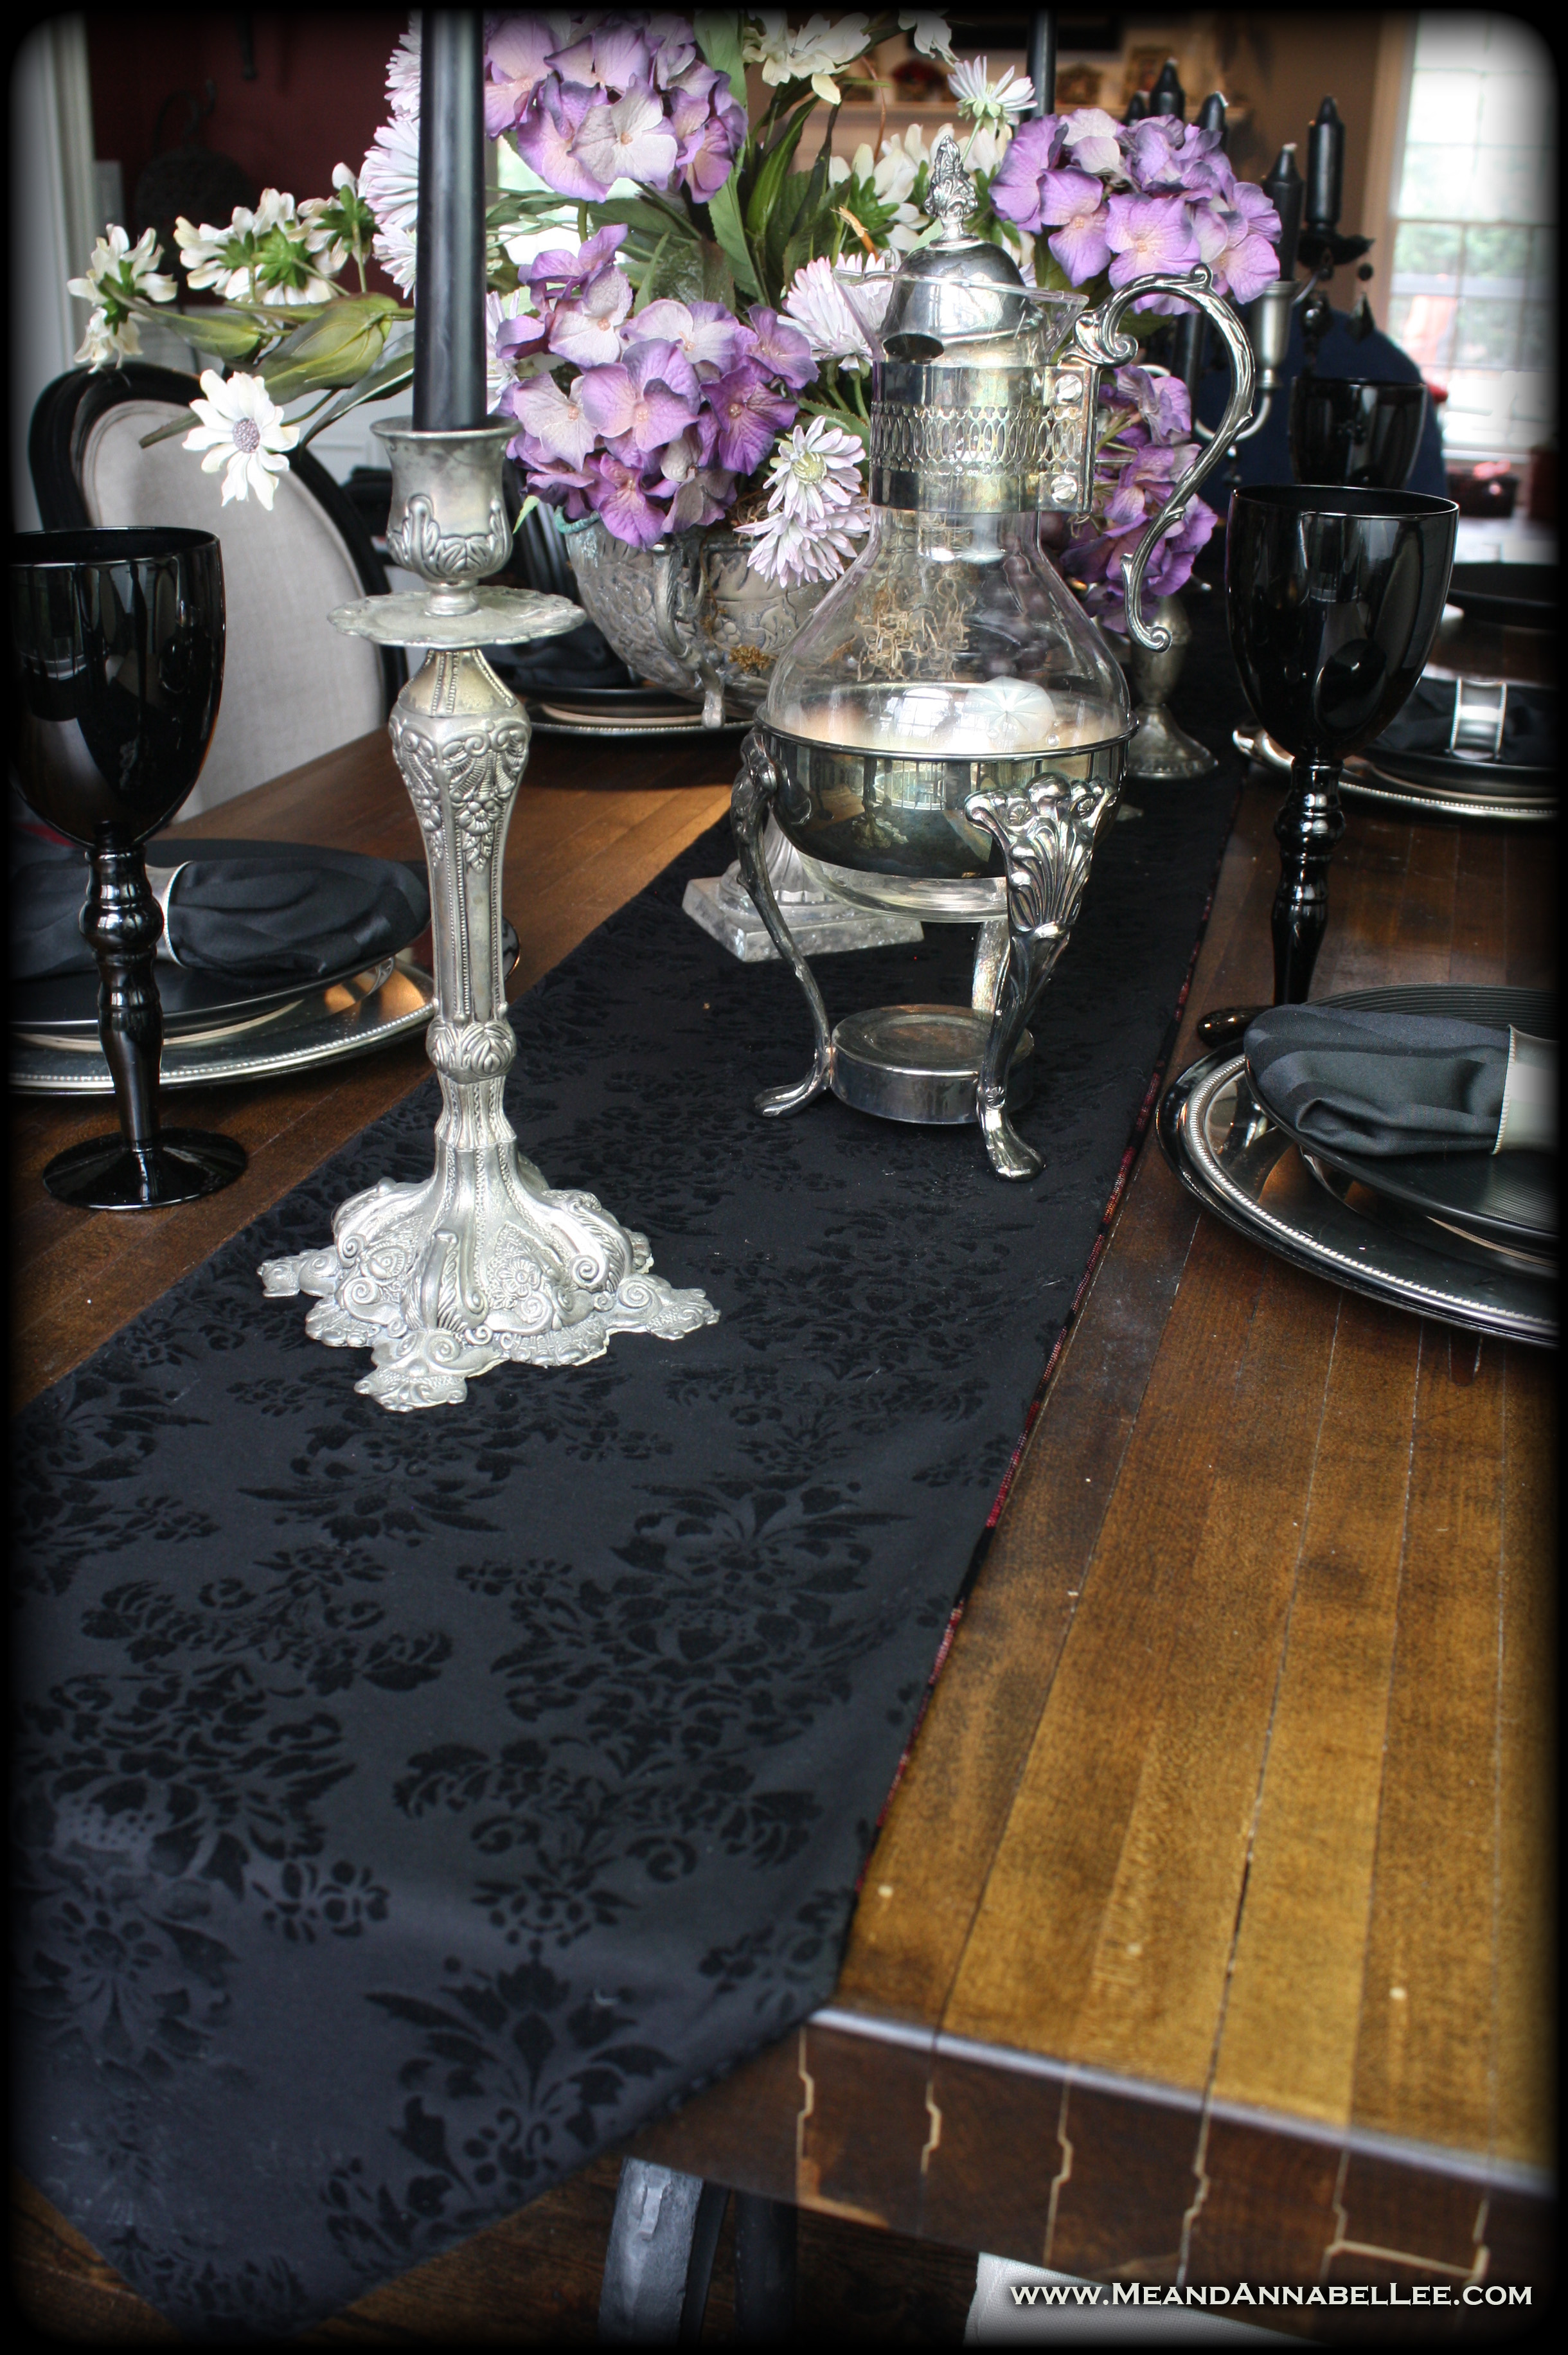 How to Make this DIY Double Sided Victorian Gothic Table Runner | Black Flocked Velvet Damask | Goth Home Decor | Table Setting | www.MeandAnnabelLee.com